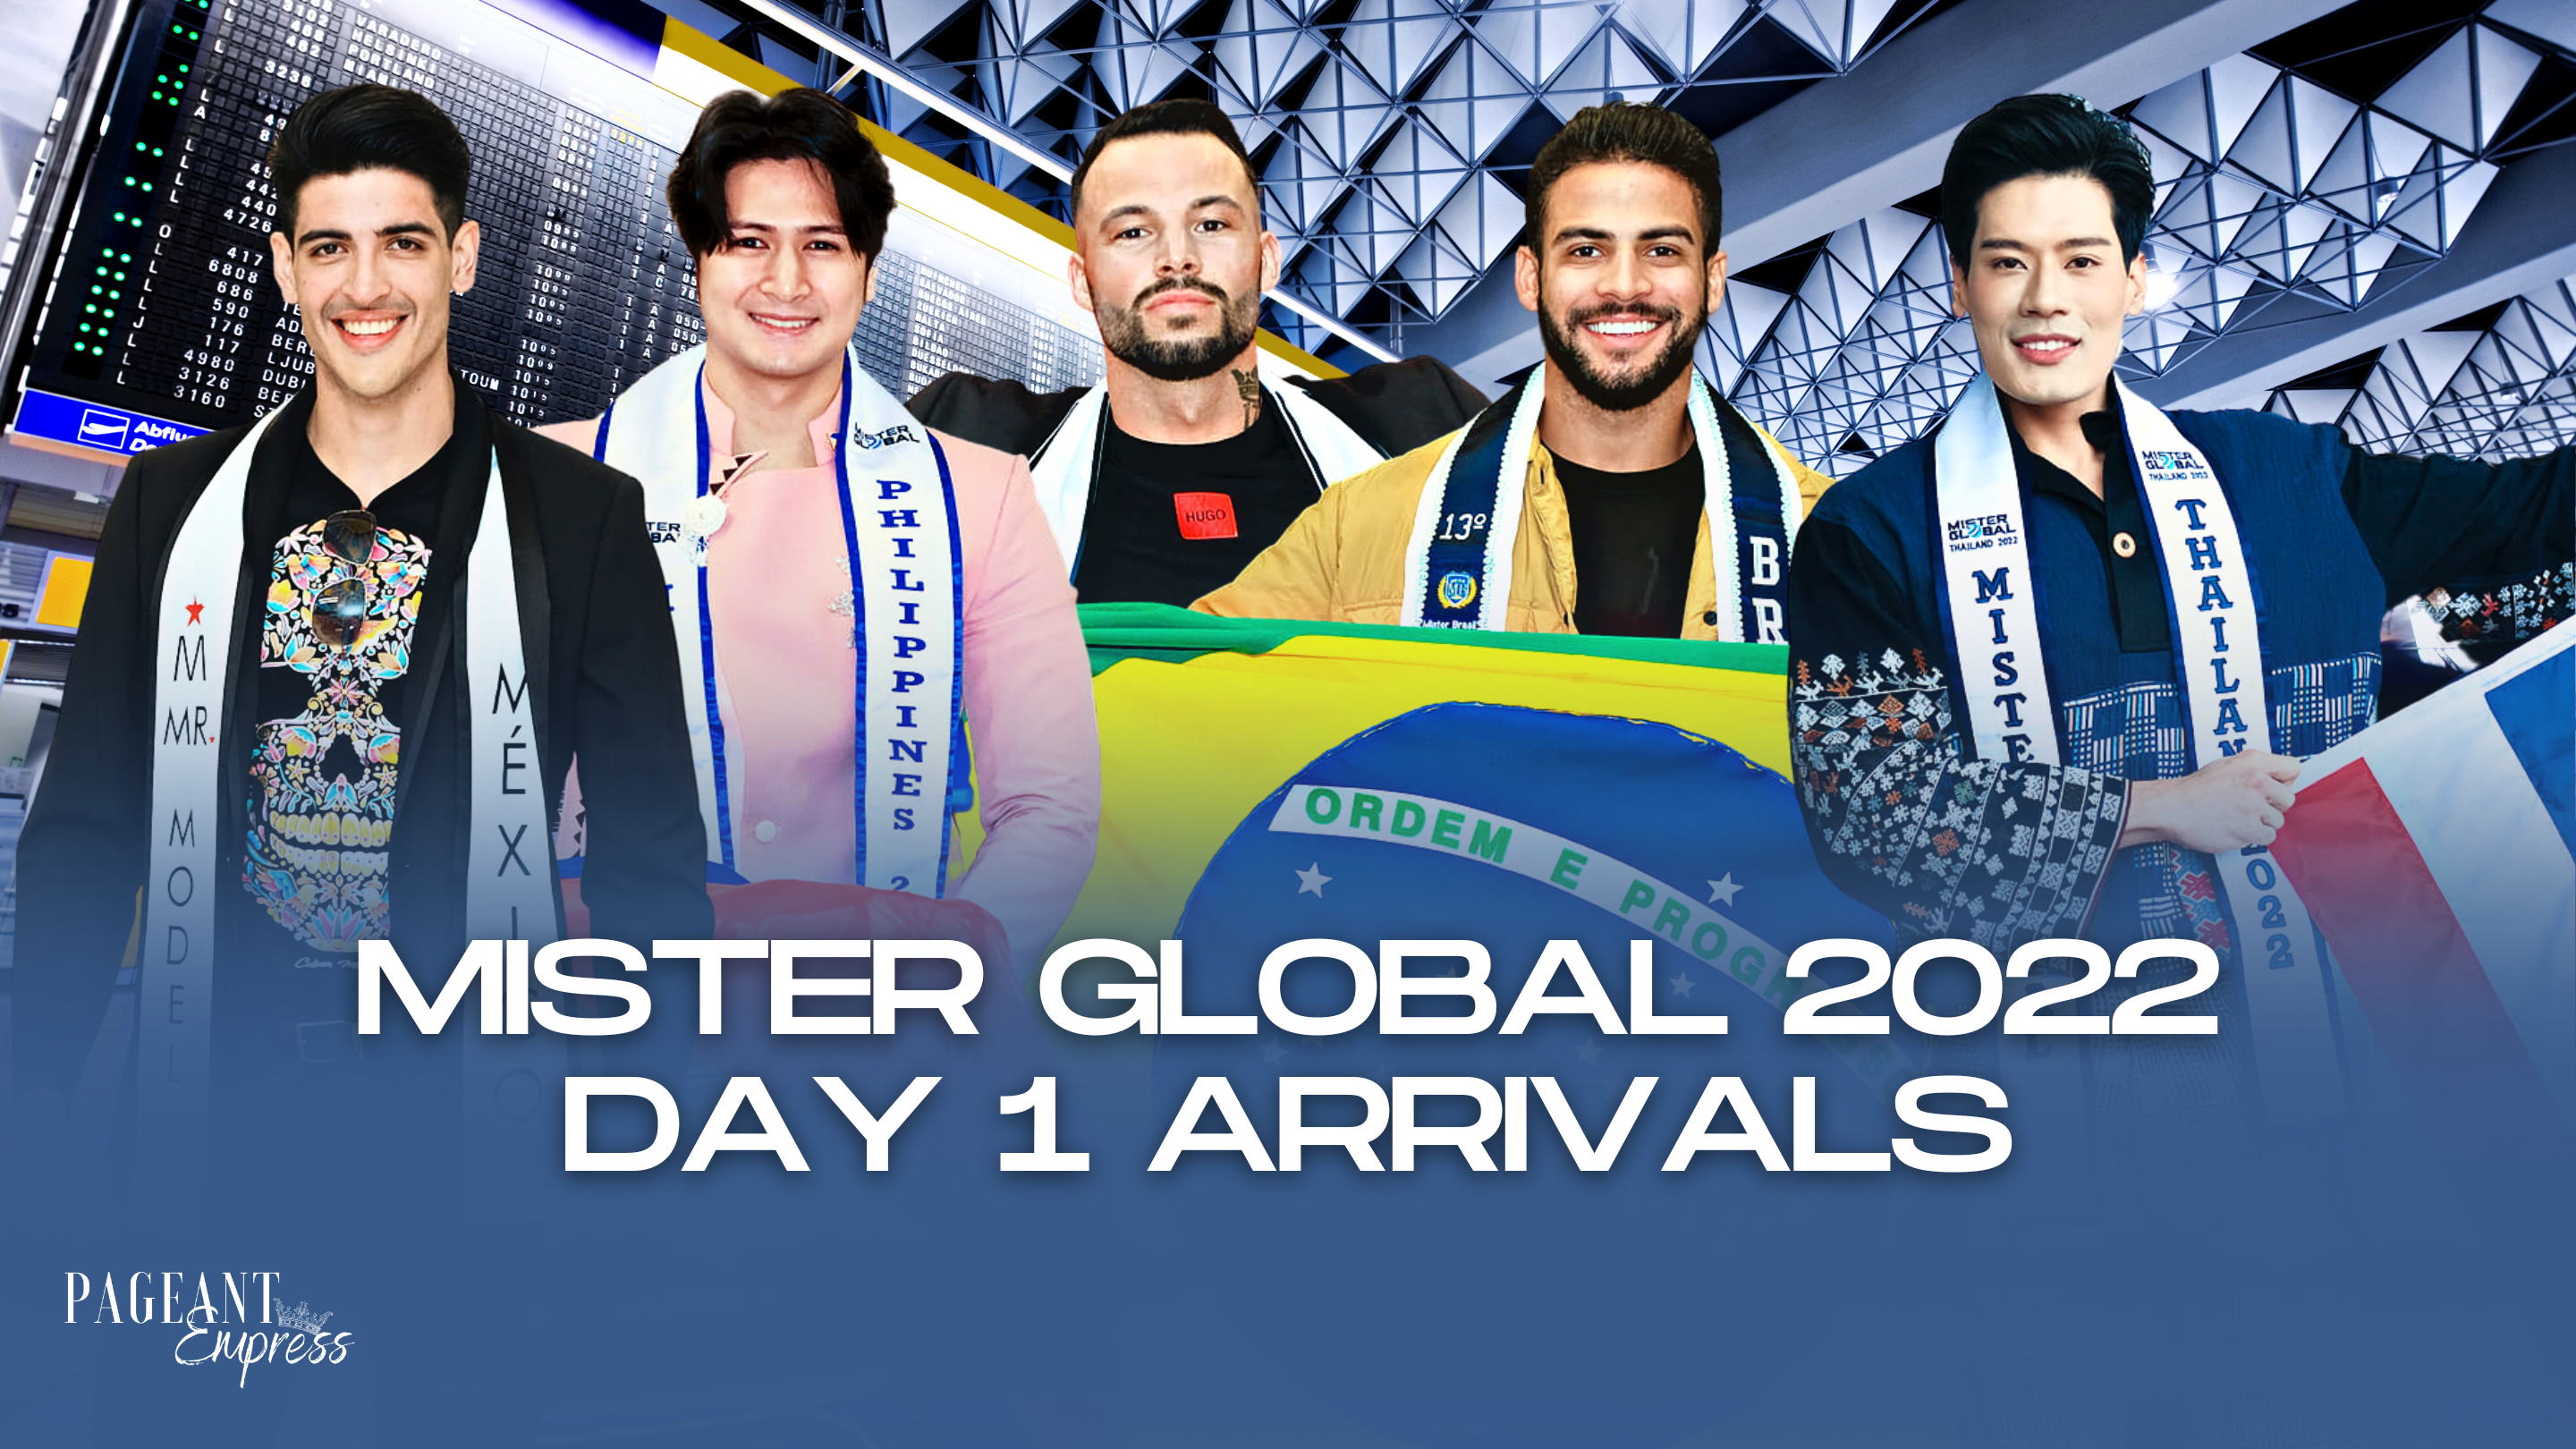 Mister Global 2022 Day 1 Arrivals in Chiang Mai, Thailand